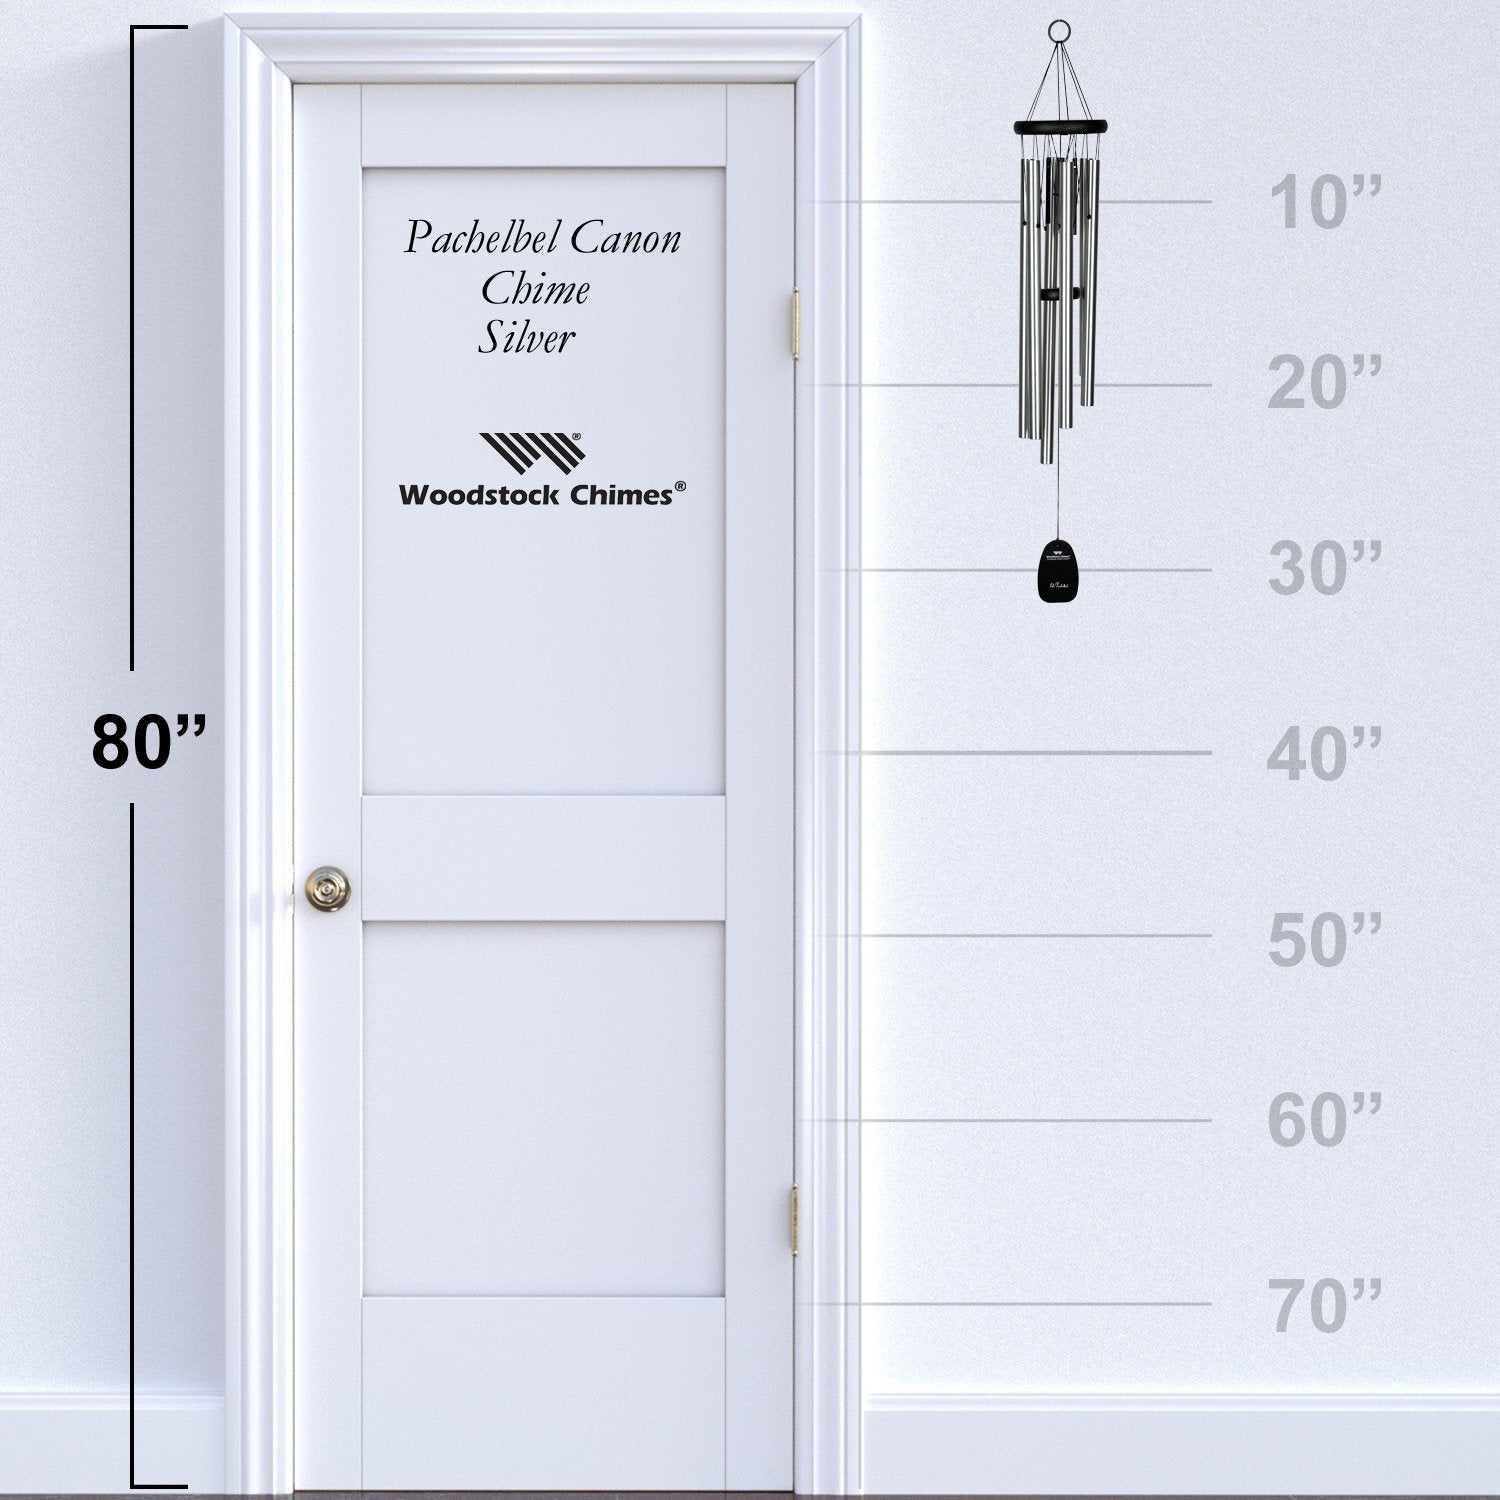 Woodstock Wind Chimes Signature Collection, Pachelbel Canon Chime, 32'' Silver Wind Chime PCC - image 4 of 7